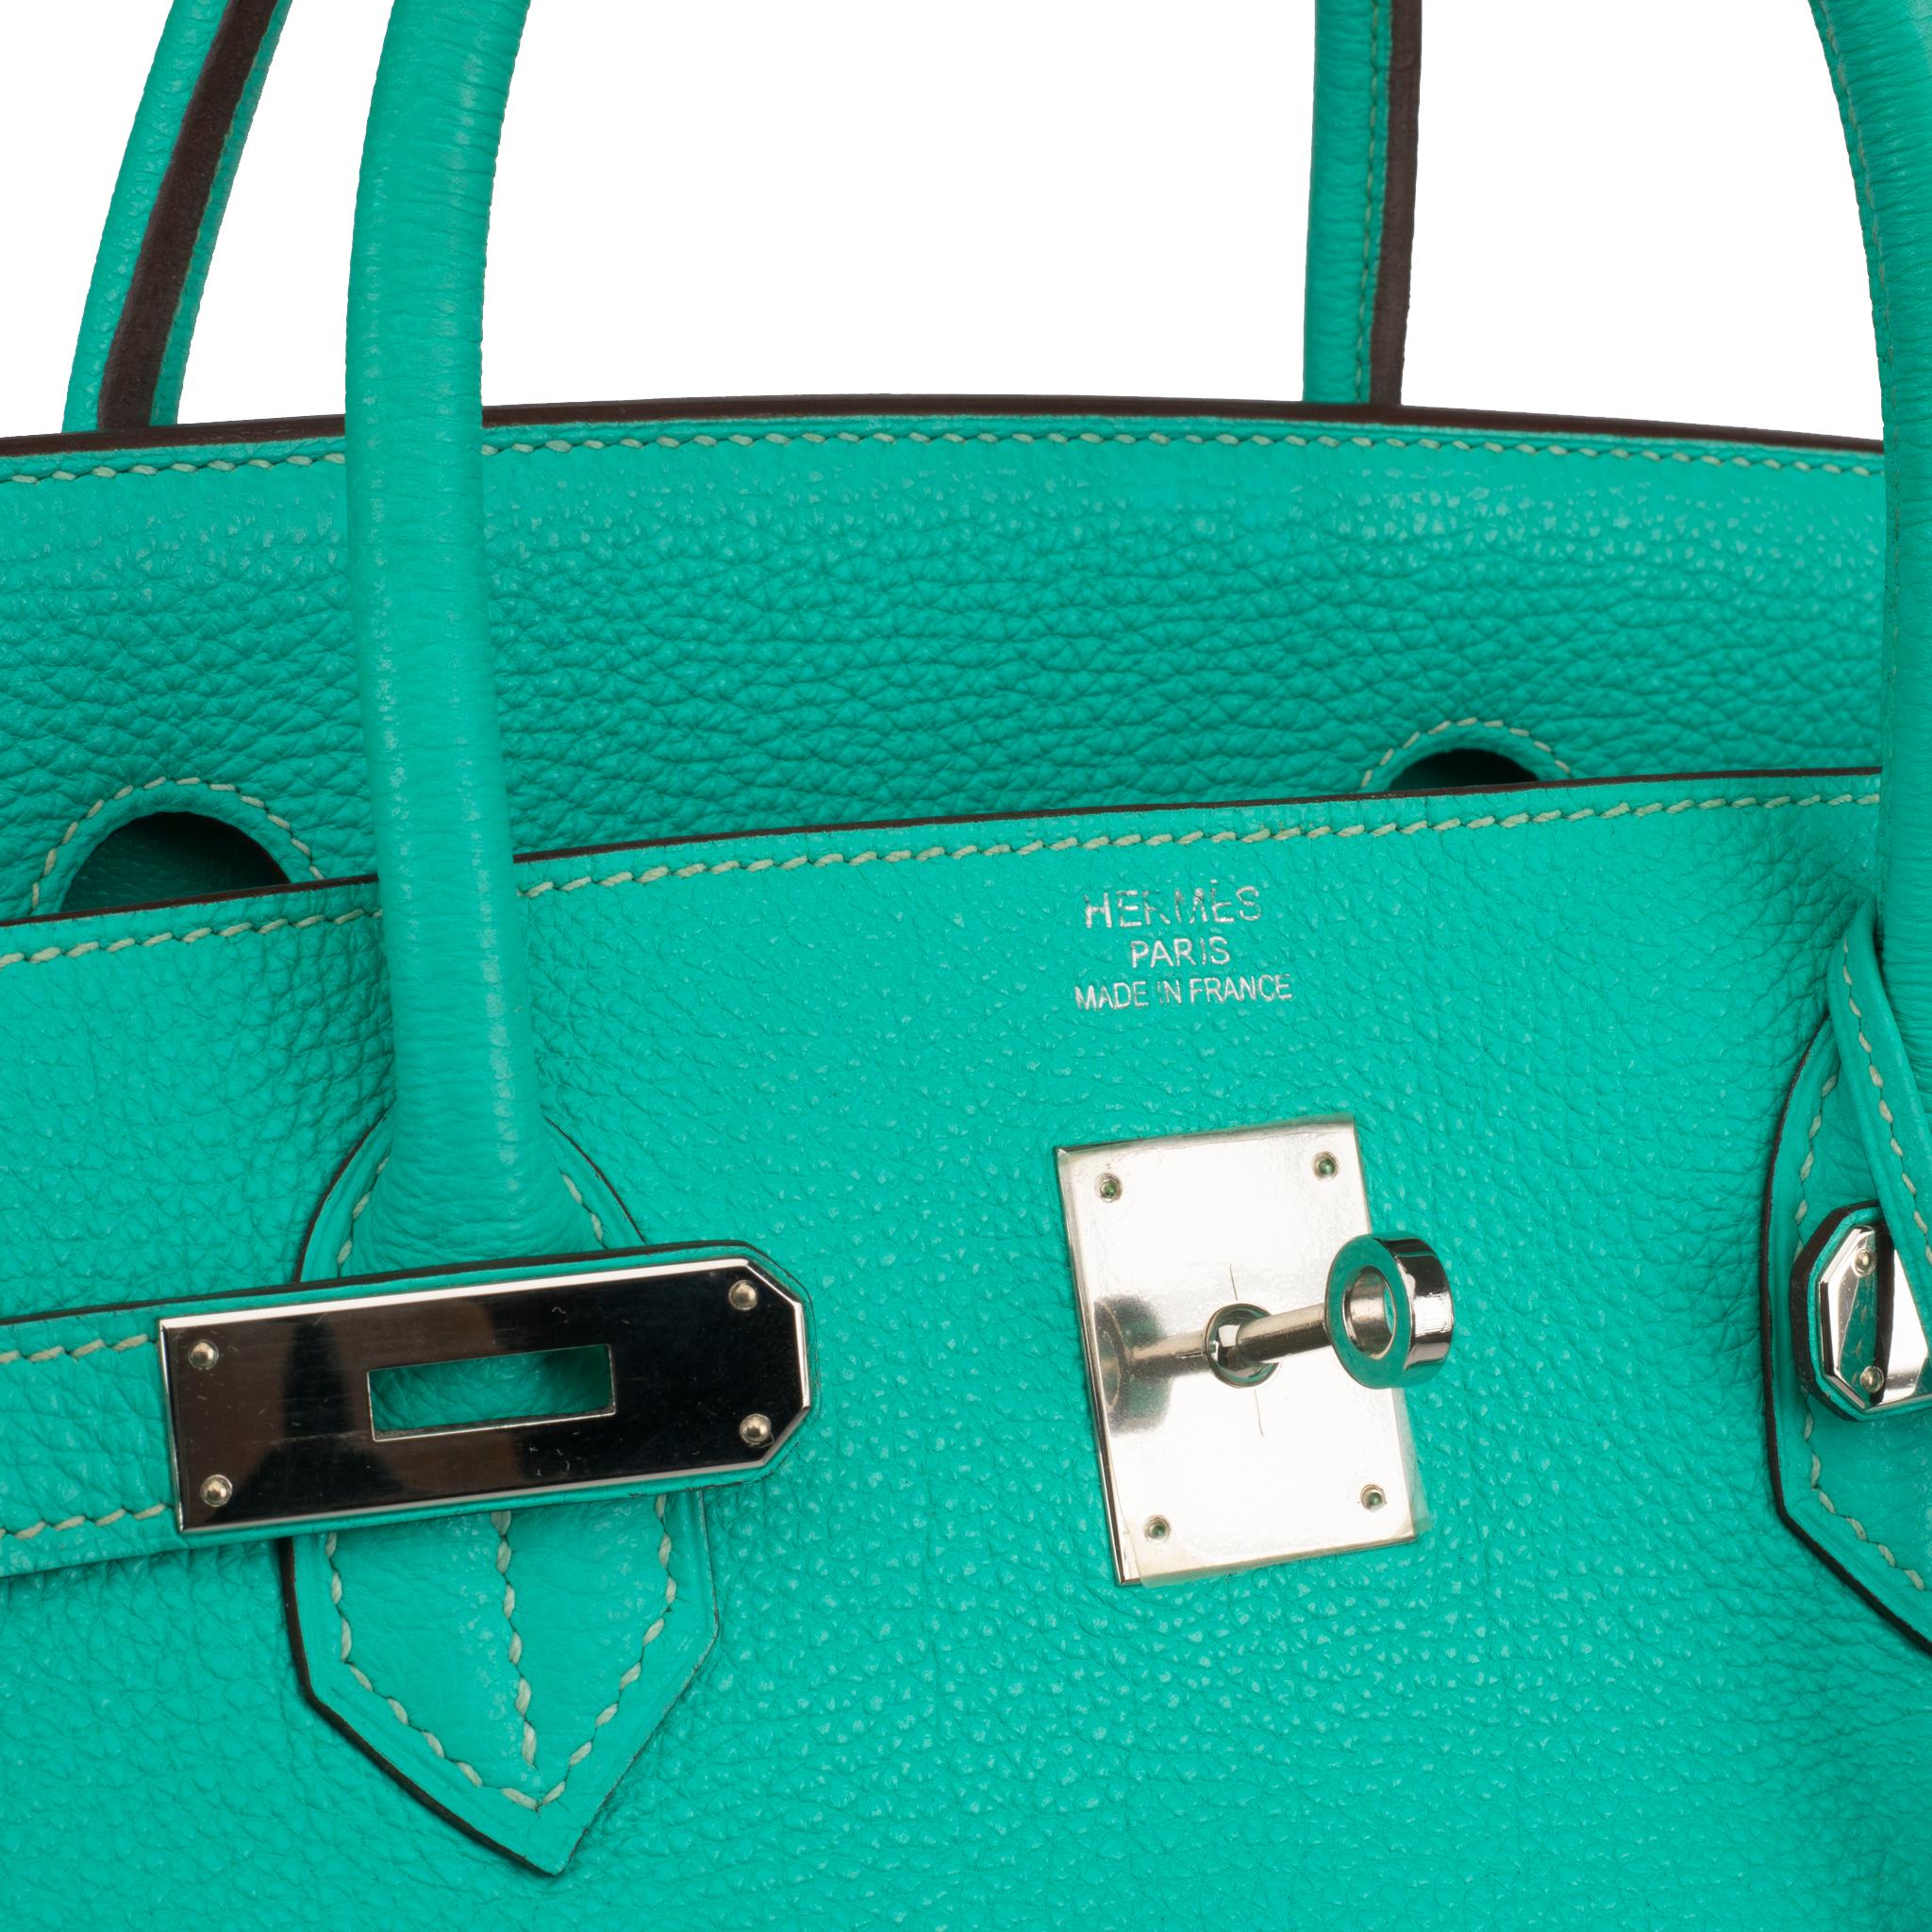 Hermès Birkin 40cm Lagoon Togo Leather Palladium Hardware In Excellent Condition For Sale In Sydney, New South Wales